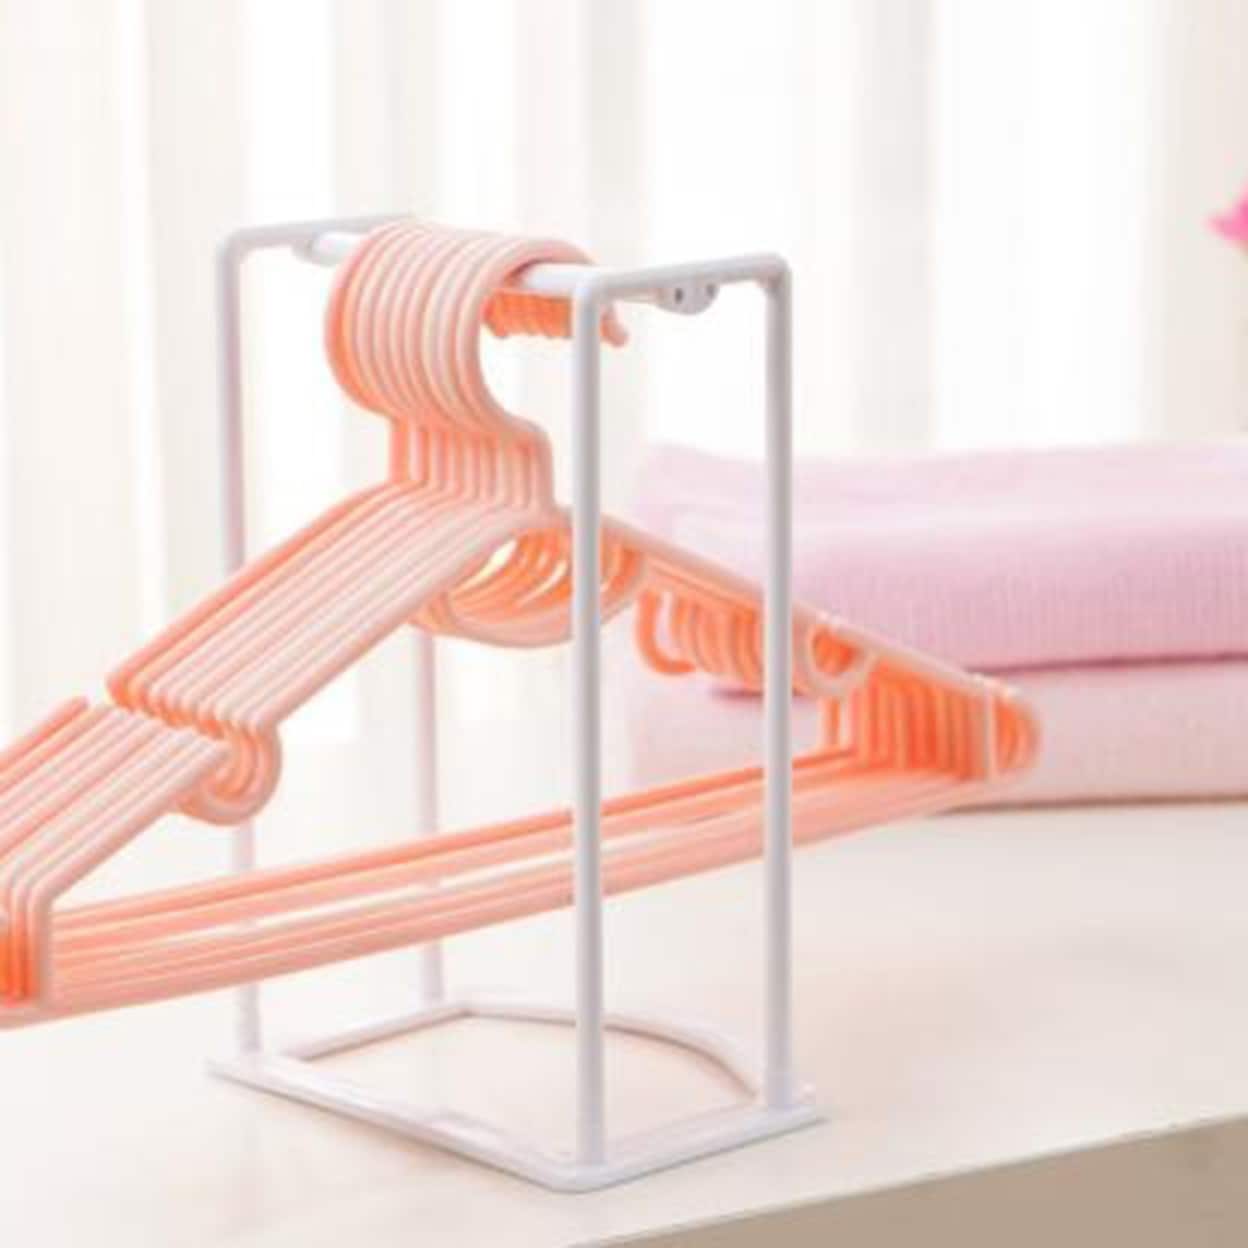 https://ak1.ostkcdn.com/images/products/is/images/direct/8e0e9ec44bdb8bd113bed692c205bdb978d99acf/Clothes-Hanger-Organizer-Convenient-Space-Saving-Pp-Hanger-Stacker-Rack-With-Lifting-Handle-For-Laundry.jpg